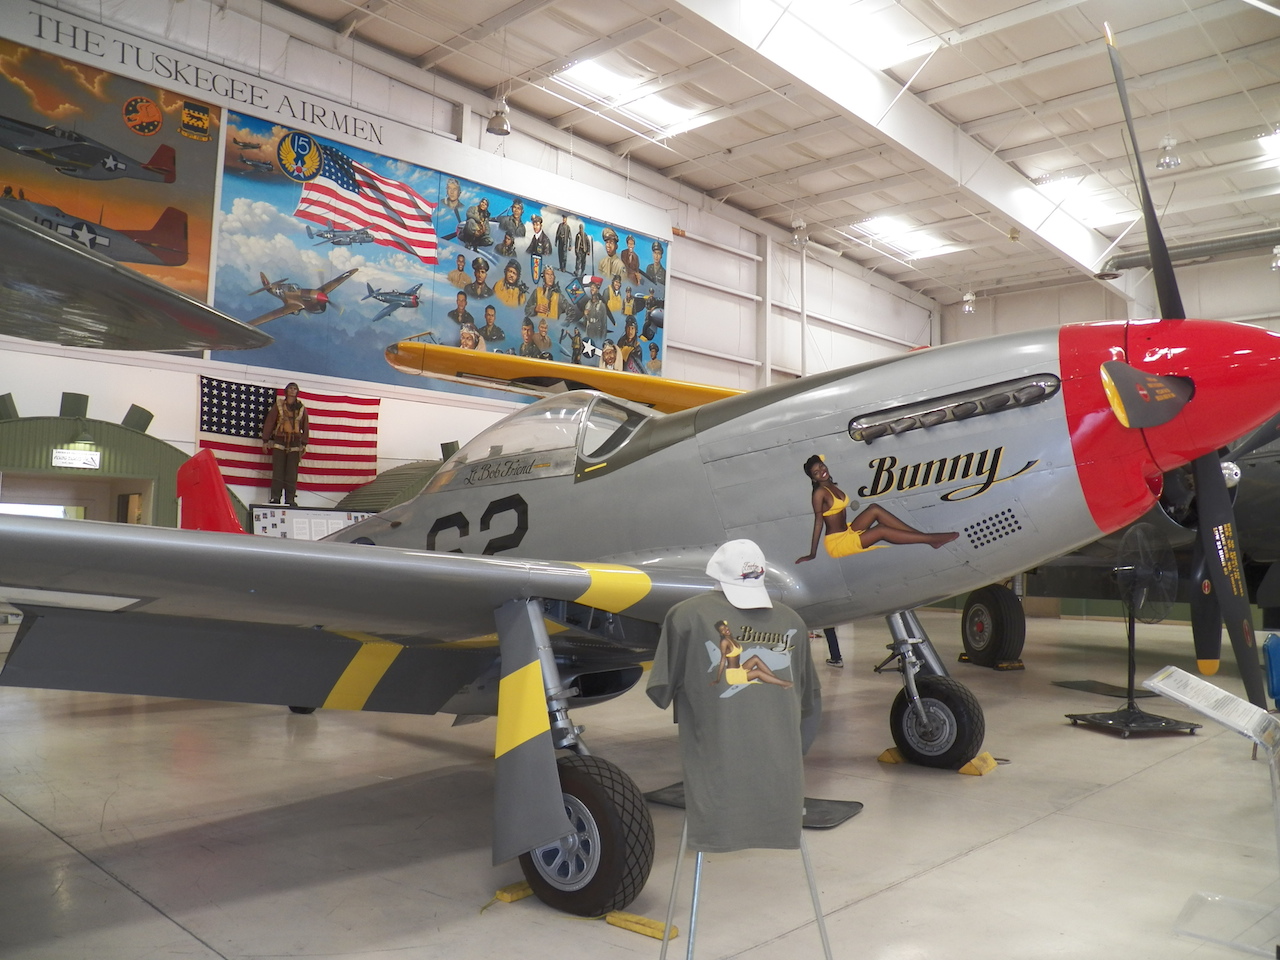 This is the Palm Springs Air Museum's P-51D Mustang "Bunny" shortly before she moved to Chino for her restoration. Check out the video link to see how gorgeous she is now! (photo via Palm Springs Air Museum)